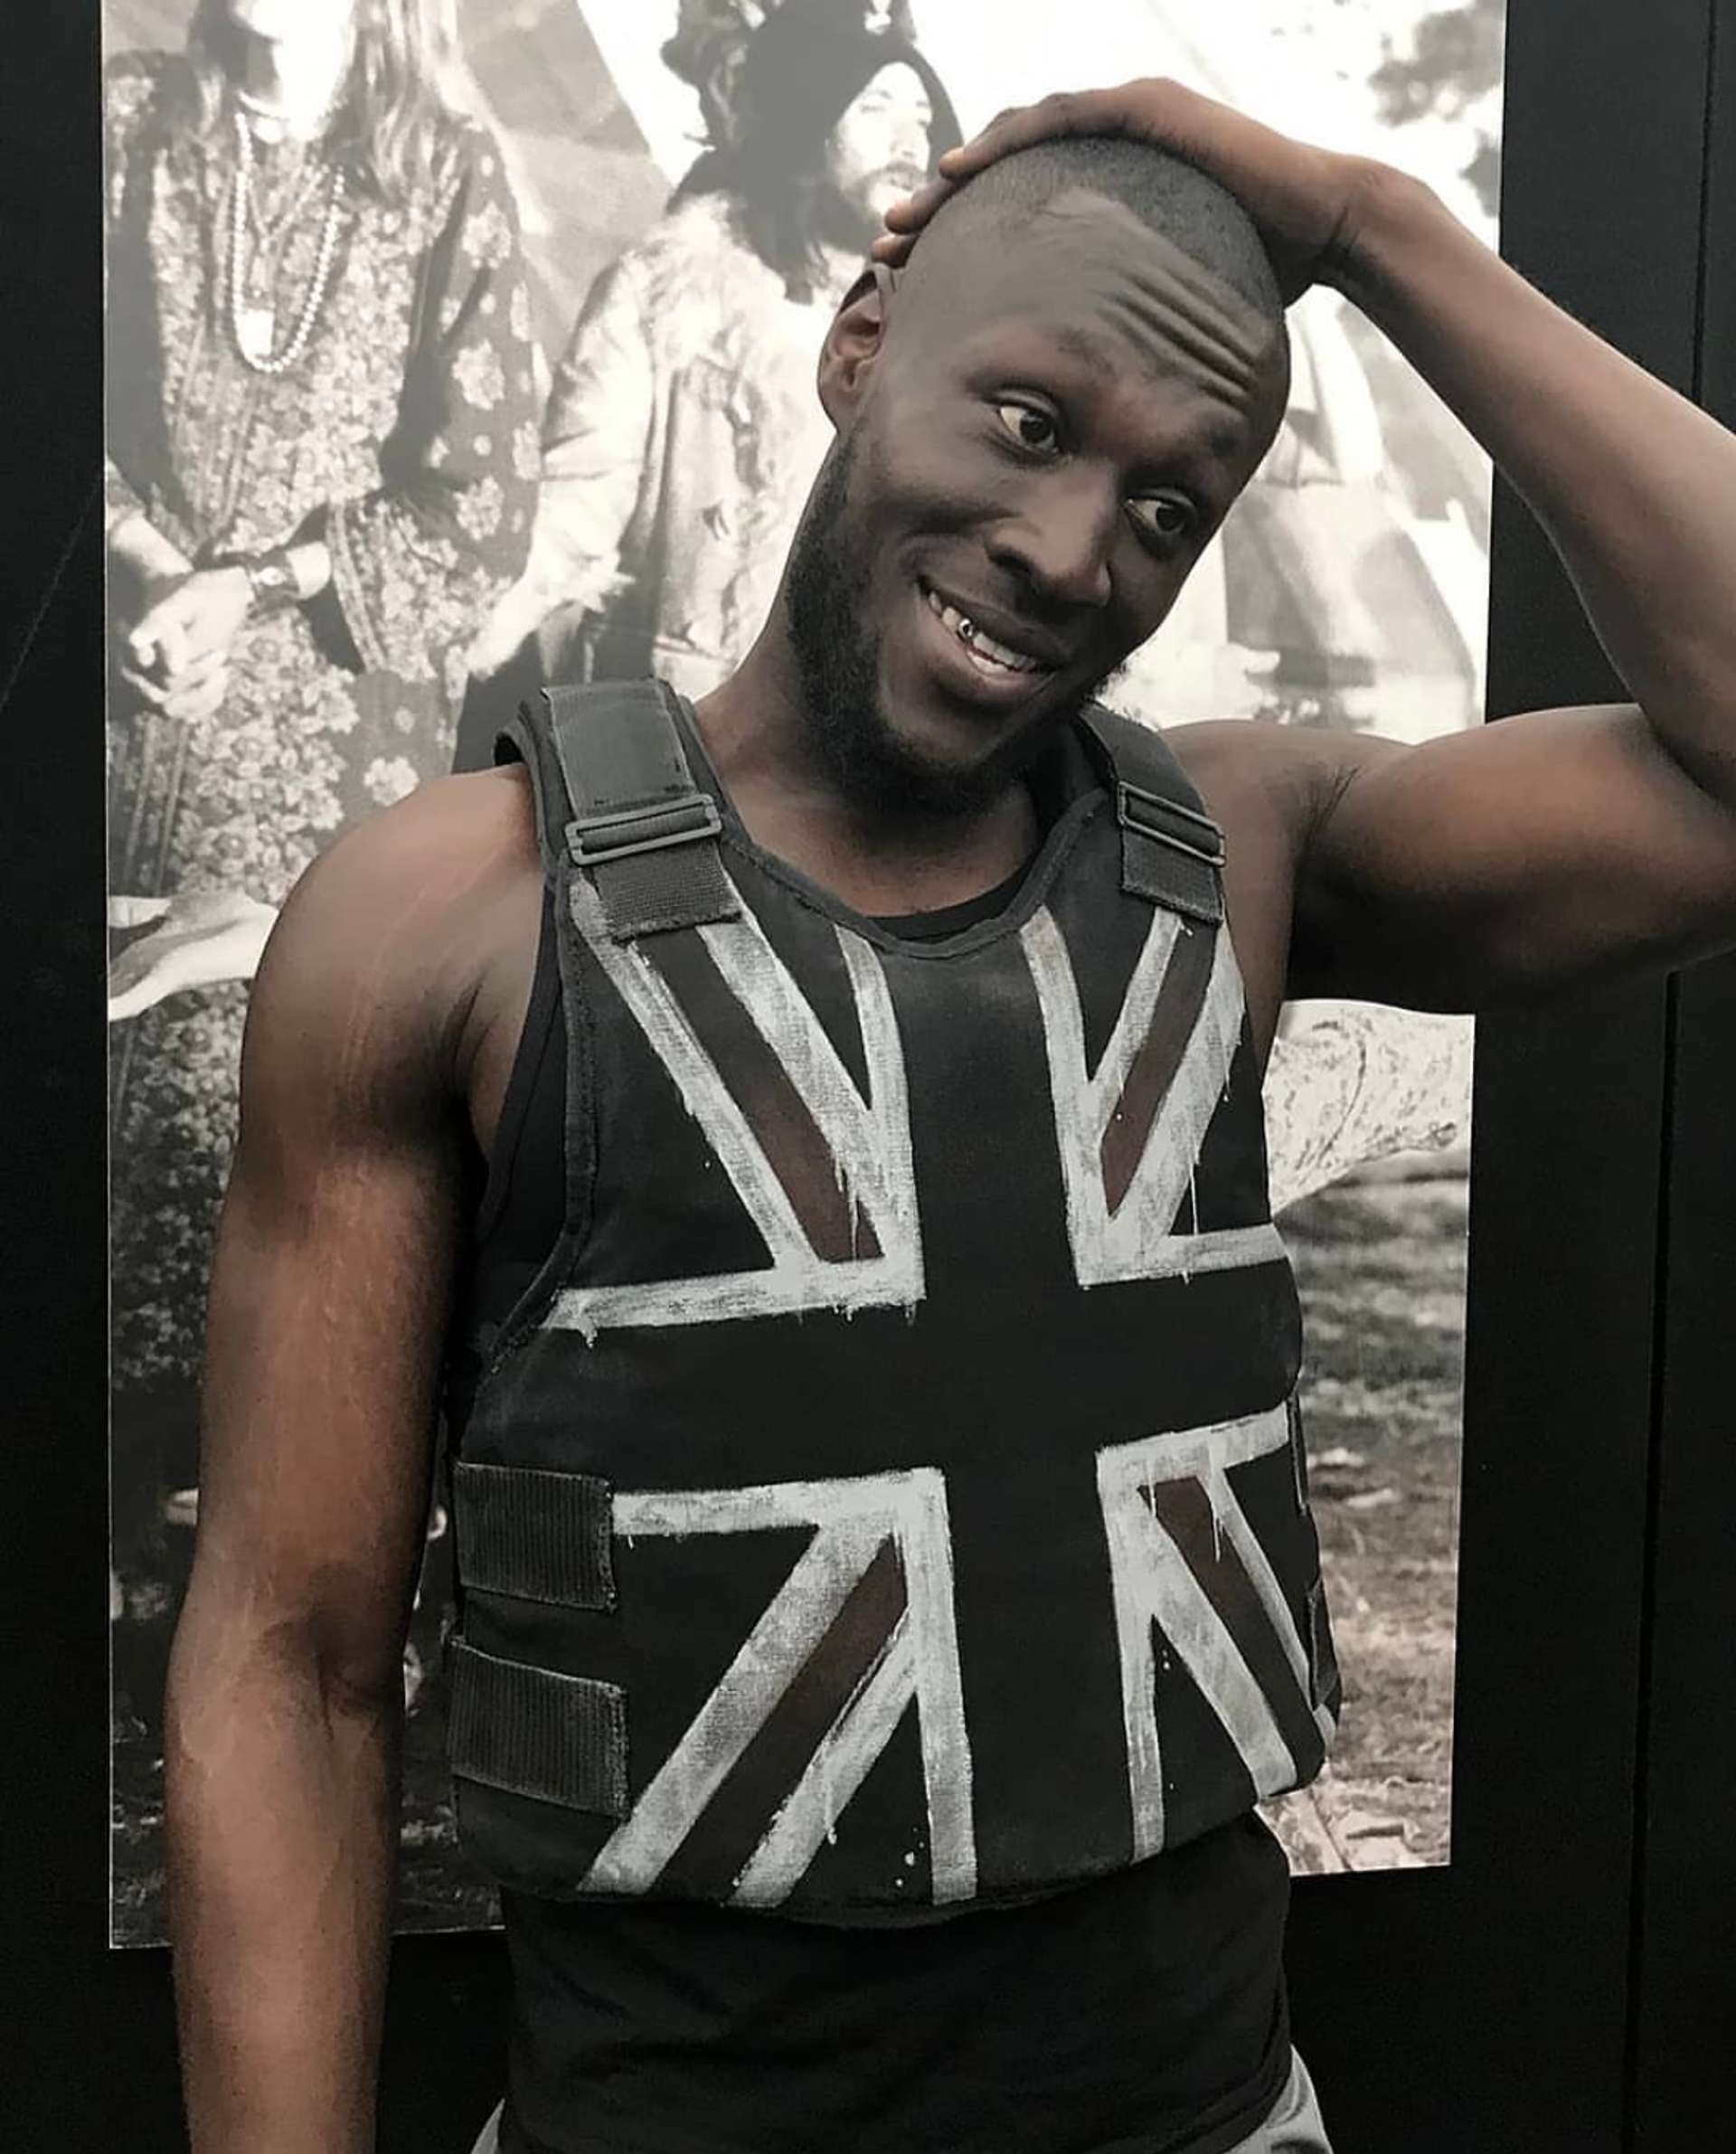 Stormzy at Glastonbury in his ‘customised’ stab-proof vest made by Banksy